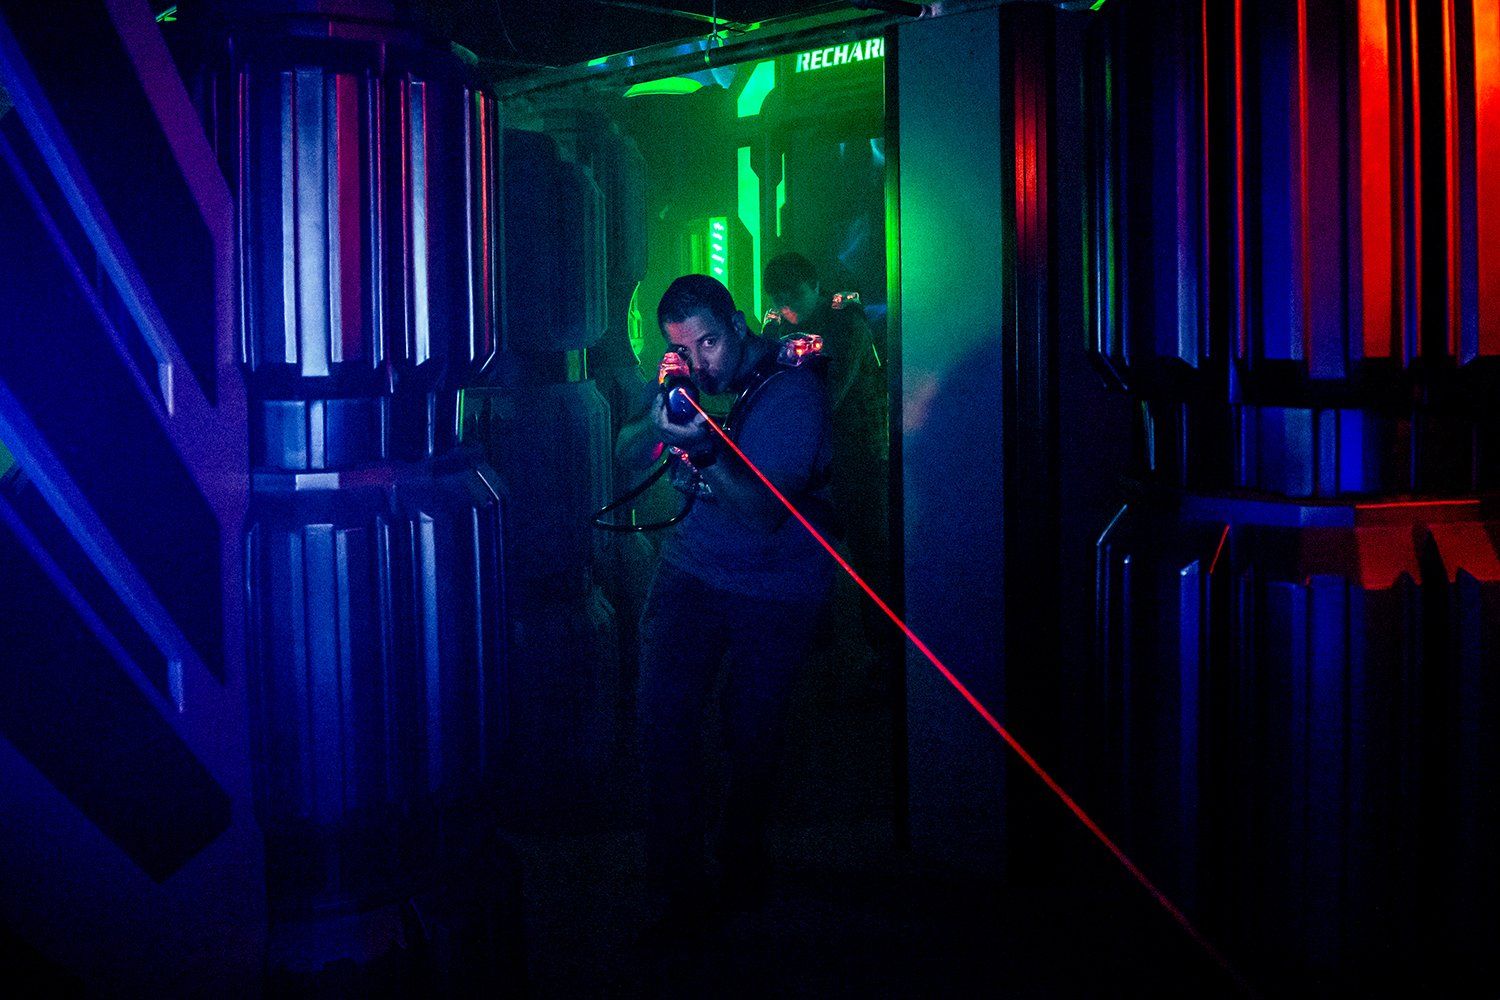 The Top 9 Reasons You're Never Too Old for Laser Tag